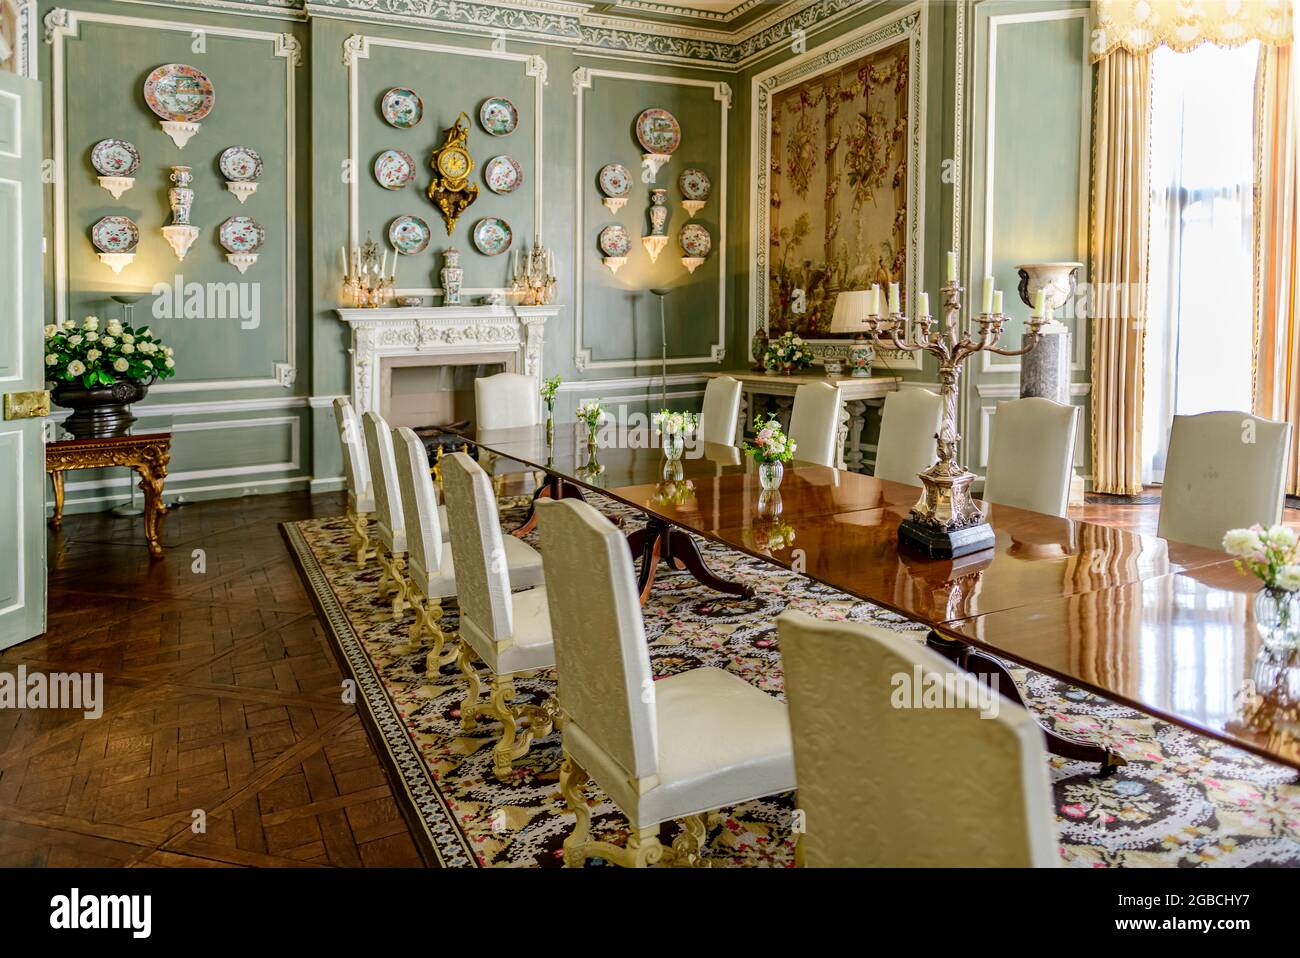 interior view of a dining room leeds castle kent england UK Stock Photo